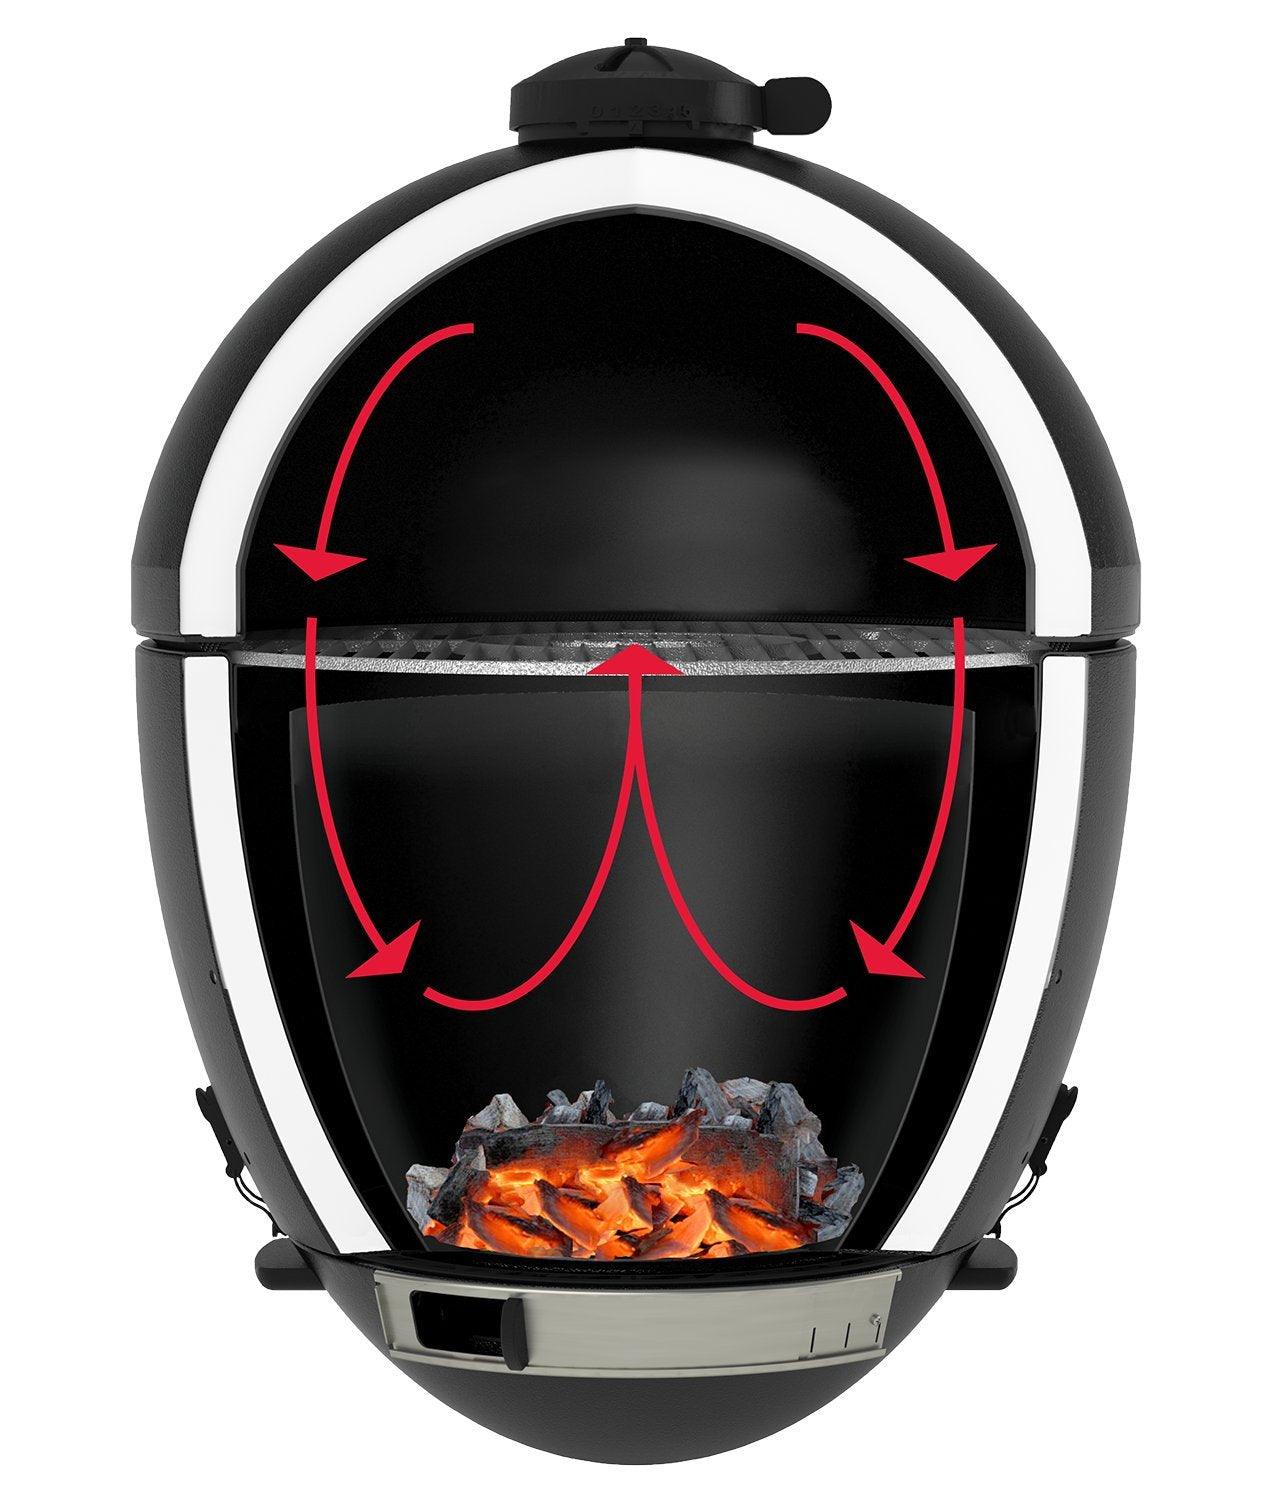 Char-Griller 06620 Akorn Kamado Kooker Charcoal Barbecue Grill and Smoker, Red - CookCave